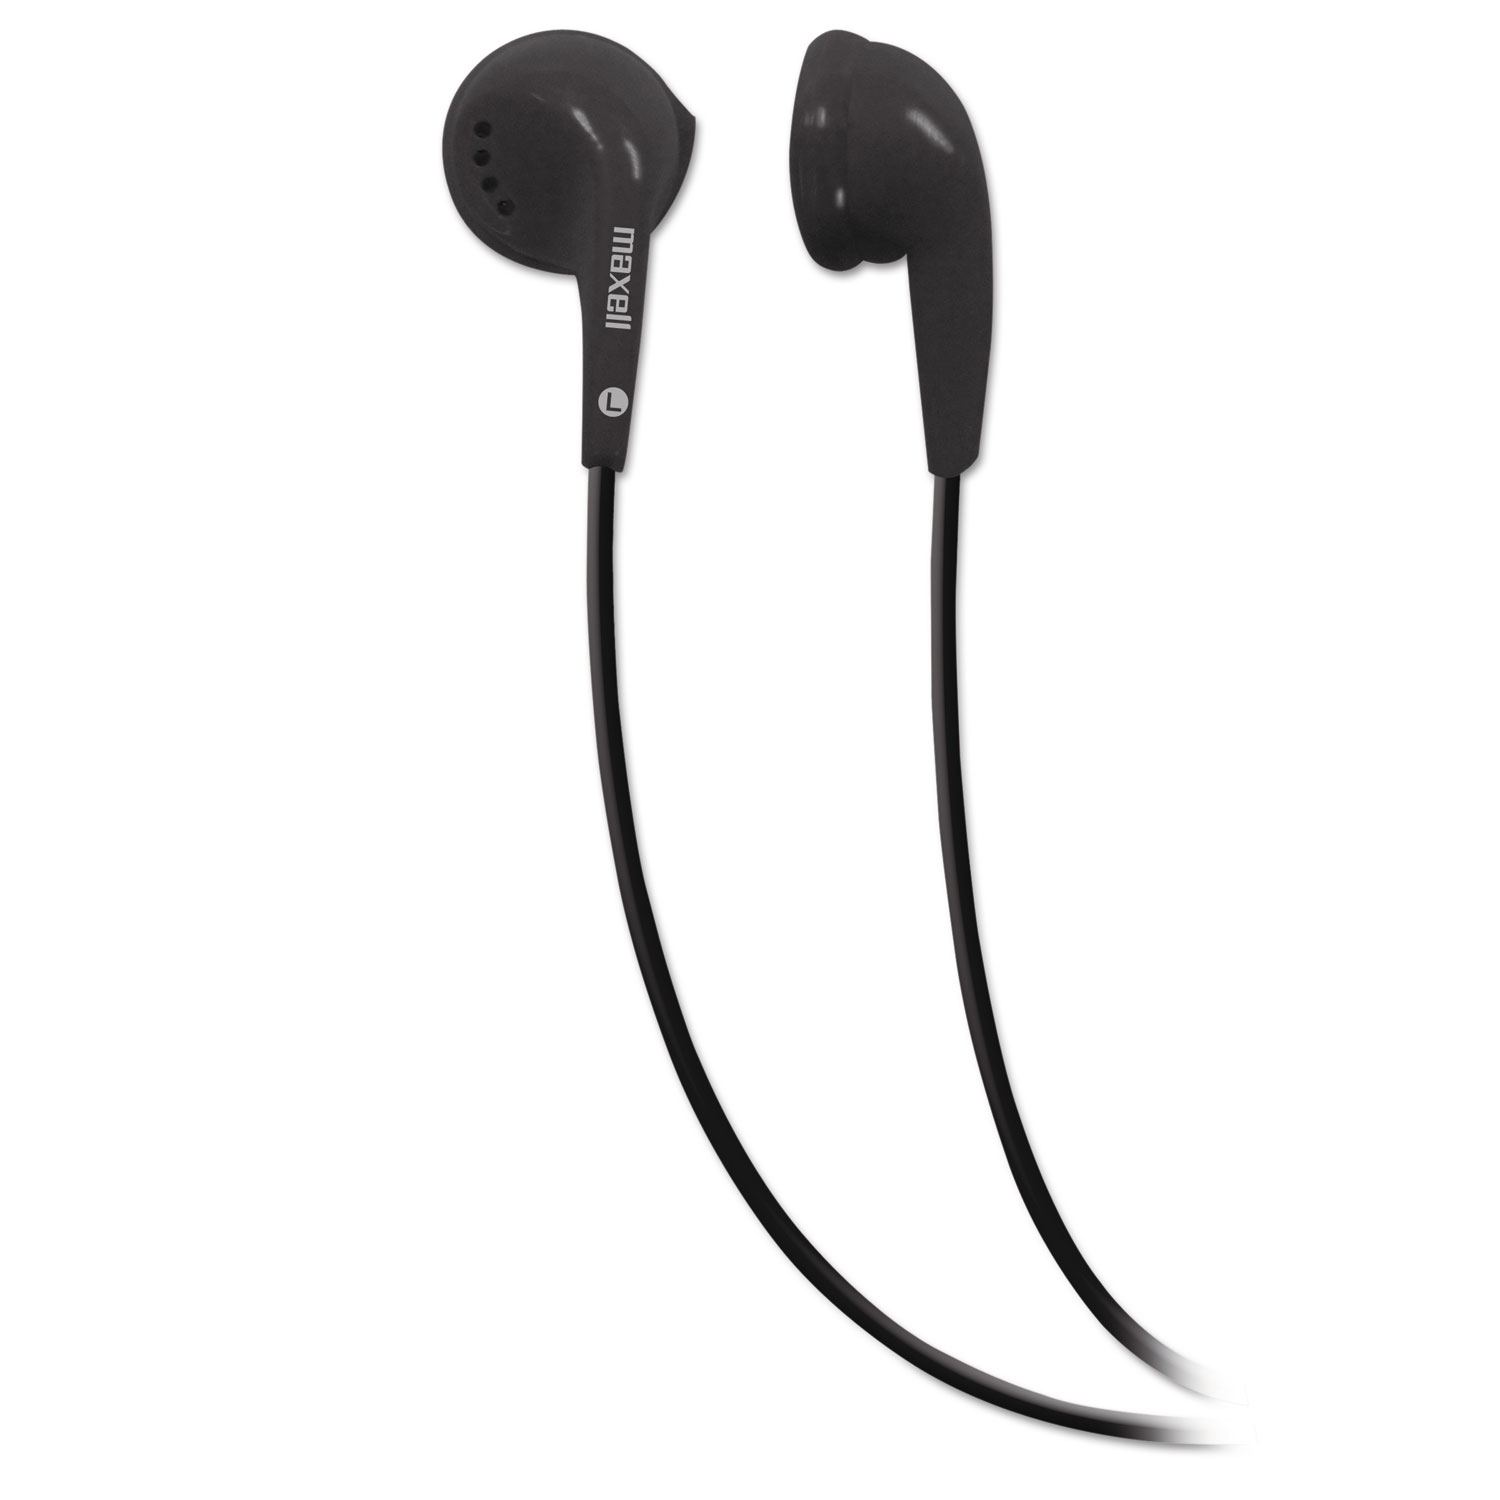  Maxell 190560 EB-95 Stereo Earbuds, Black (MAX190560) 